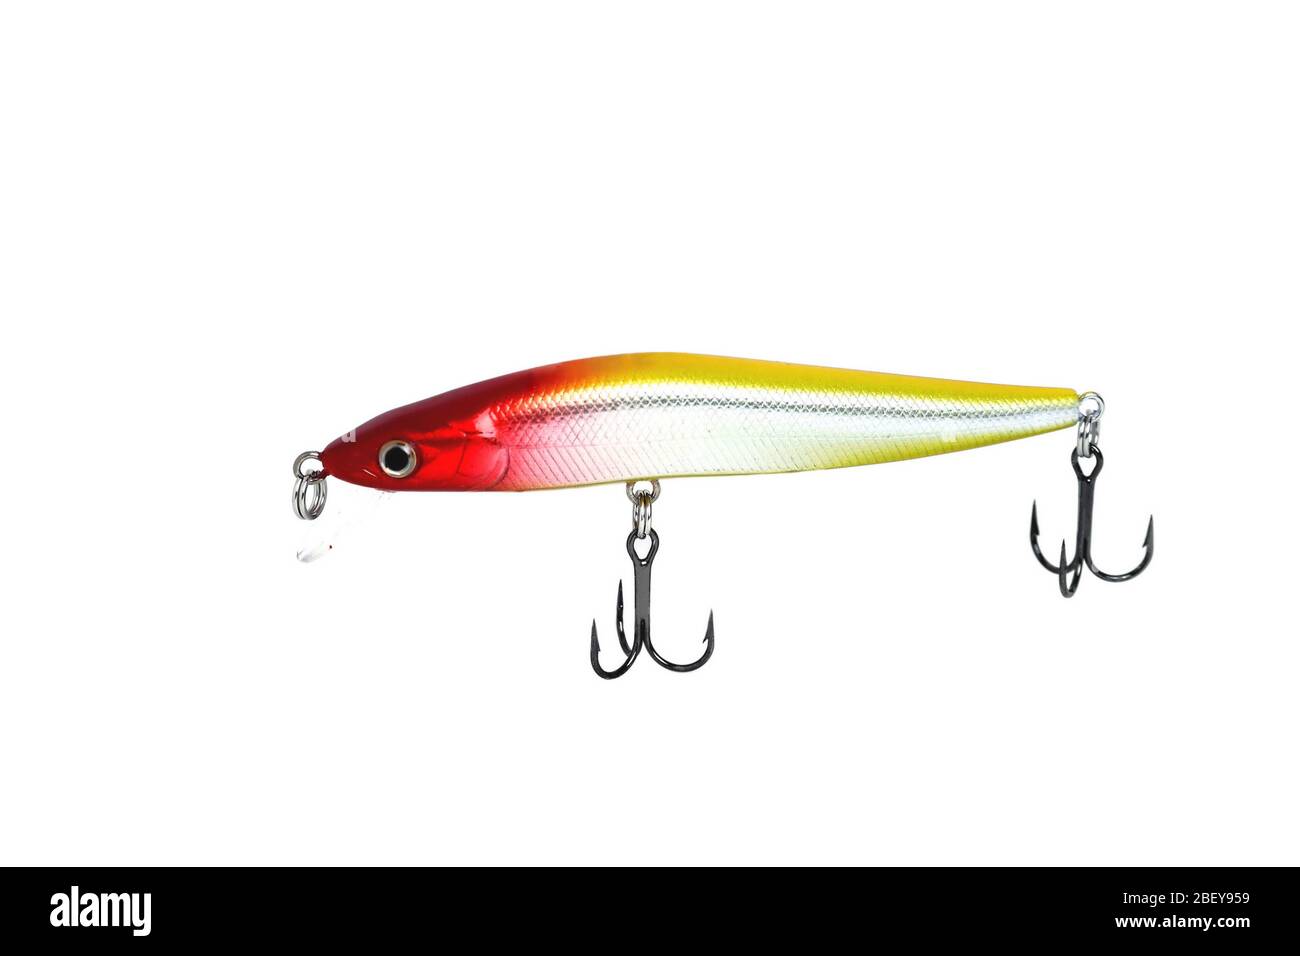 Fishing wobbler with red head, yellow back and white belly. Close-up on a white background. Stock Photo